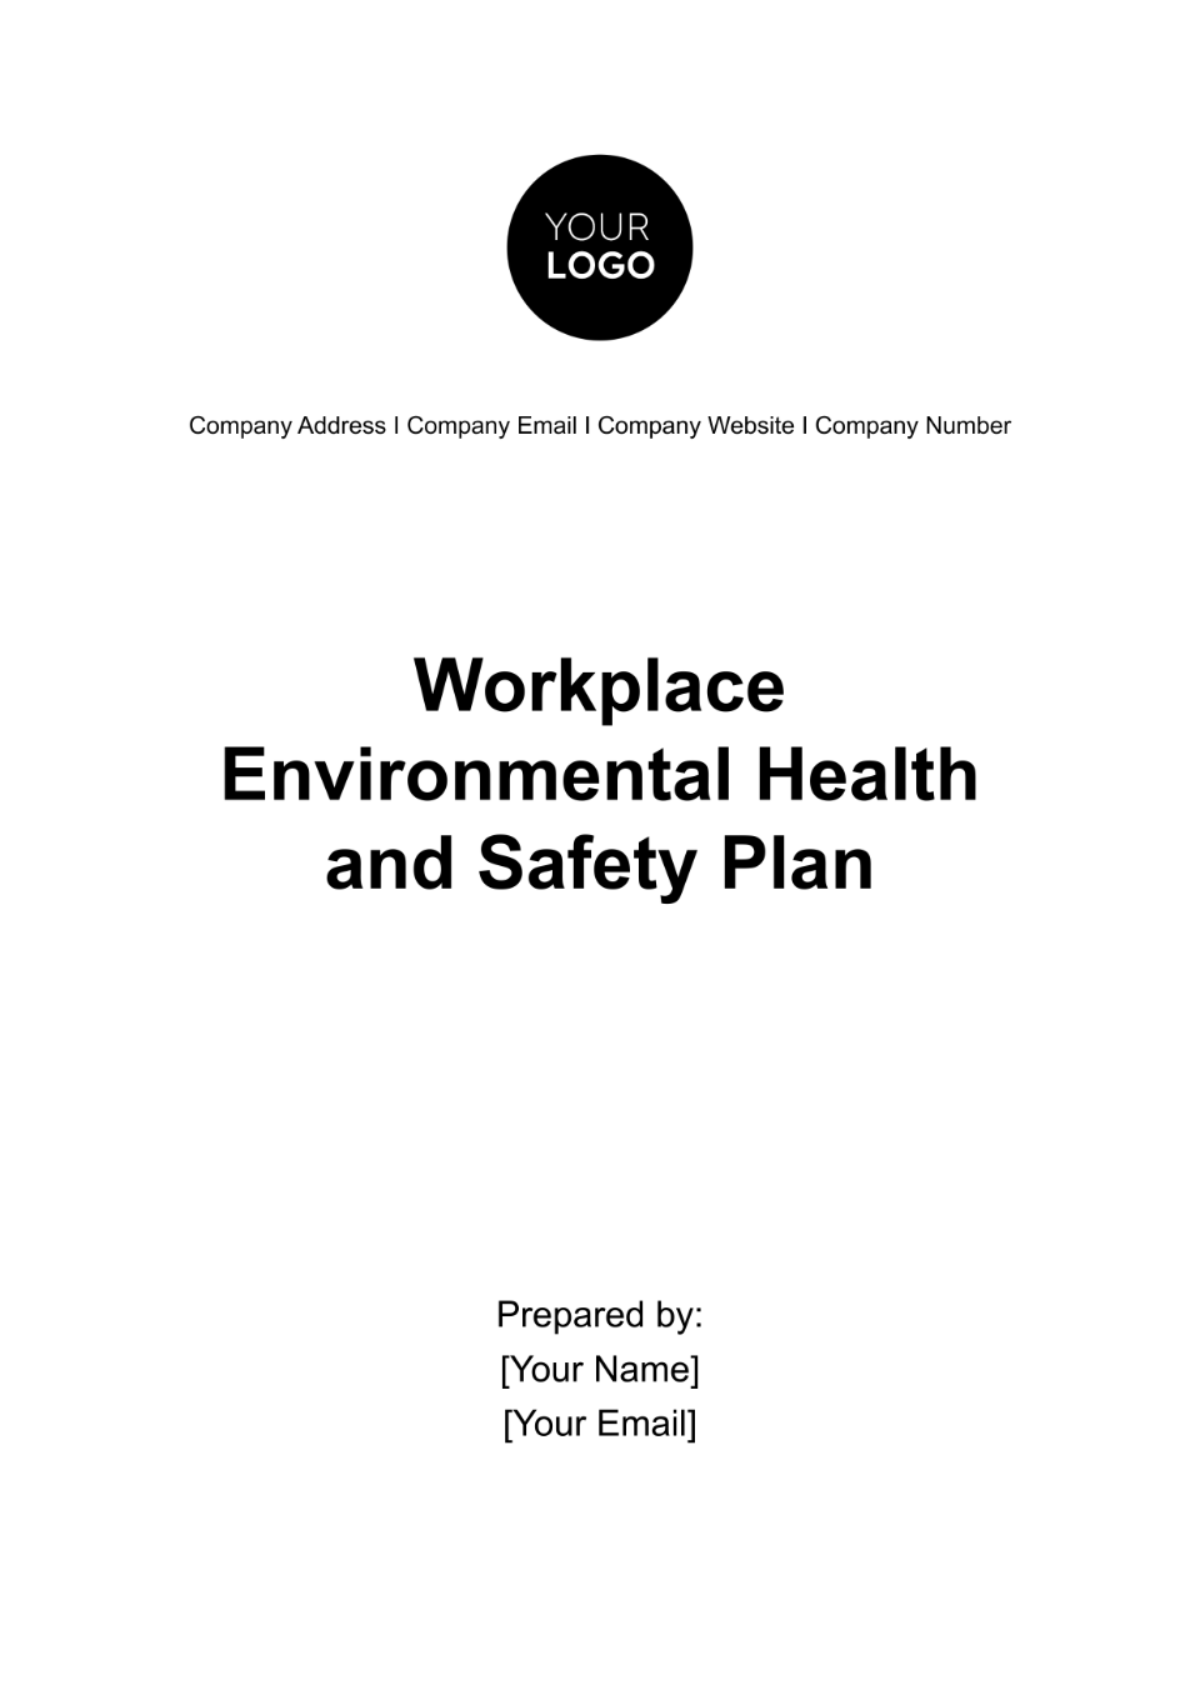 Free Workplace Environmental Health and Safety Plan Template